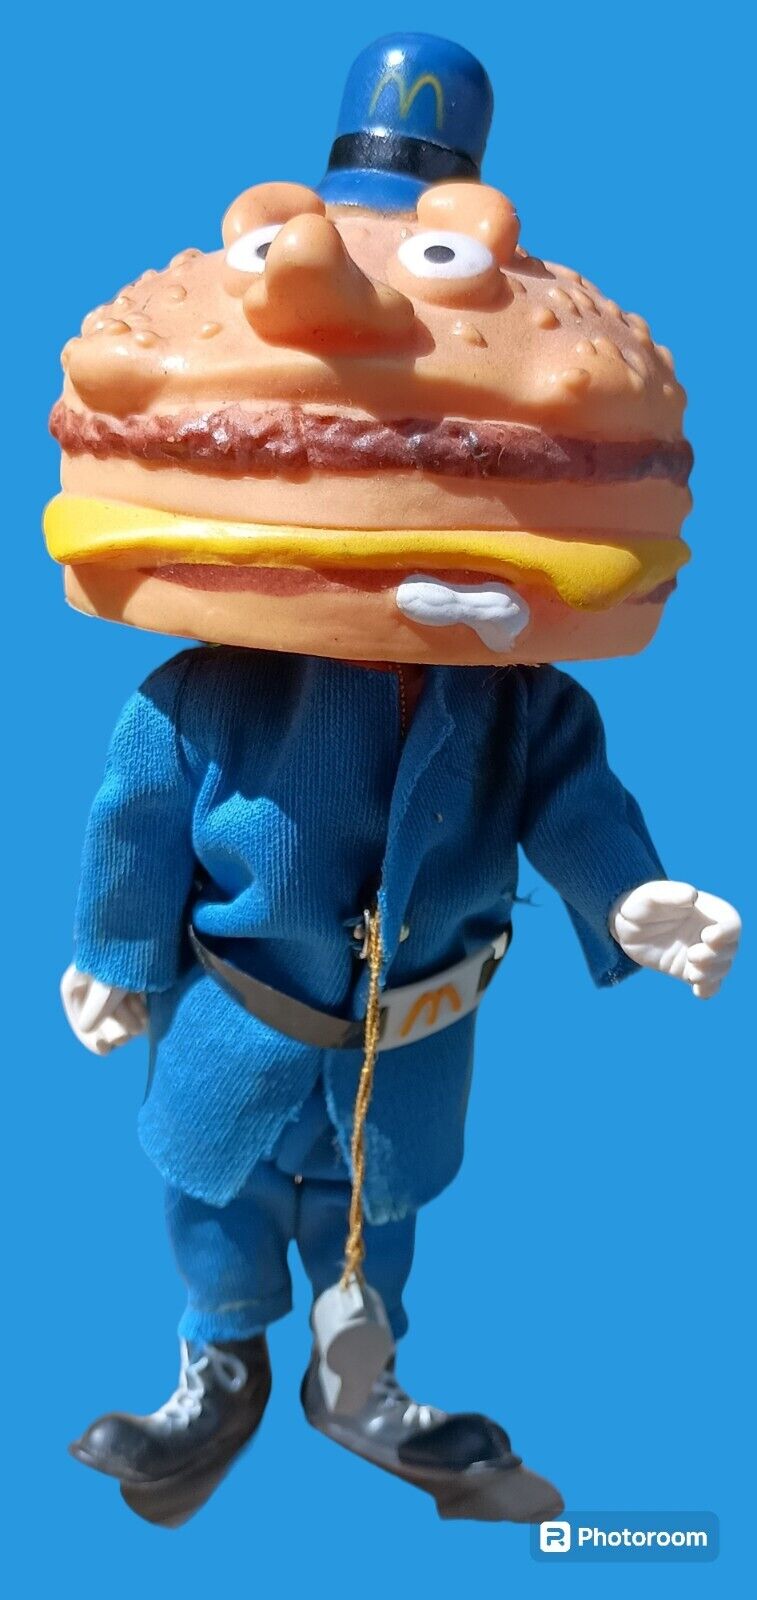 1976 Officer Big Mac Figure All Moveable Parts Work As They Should